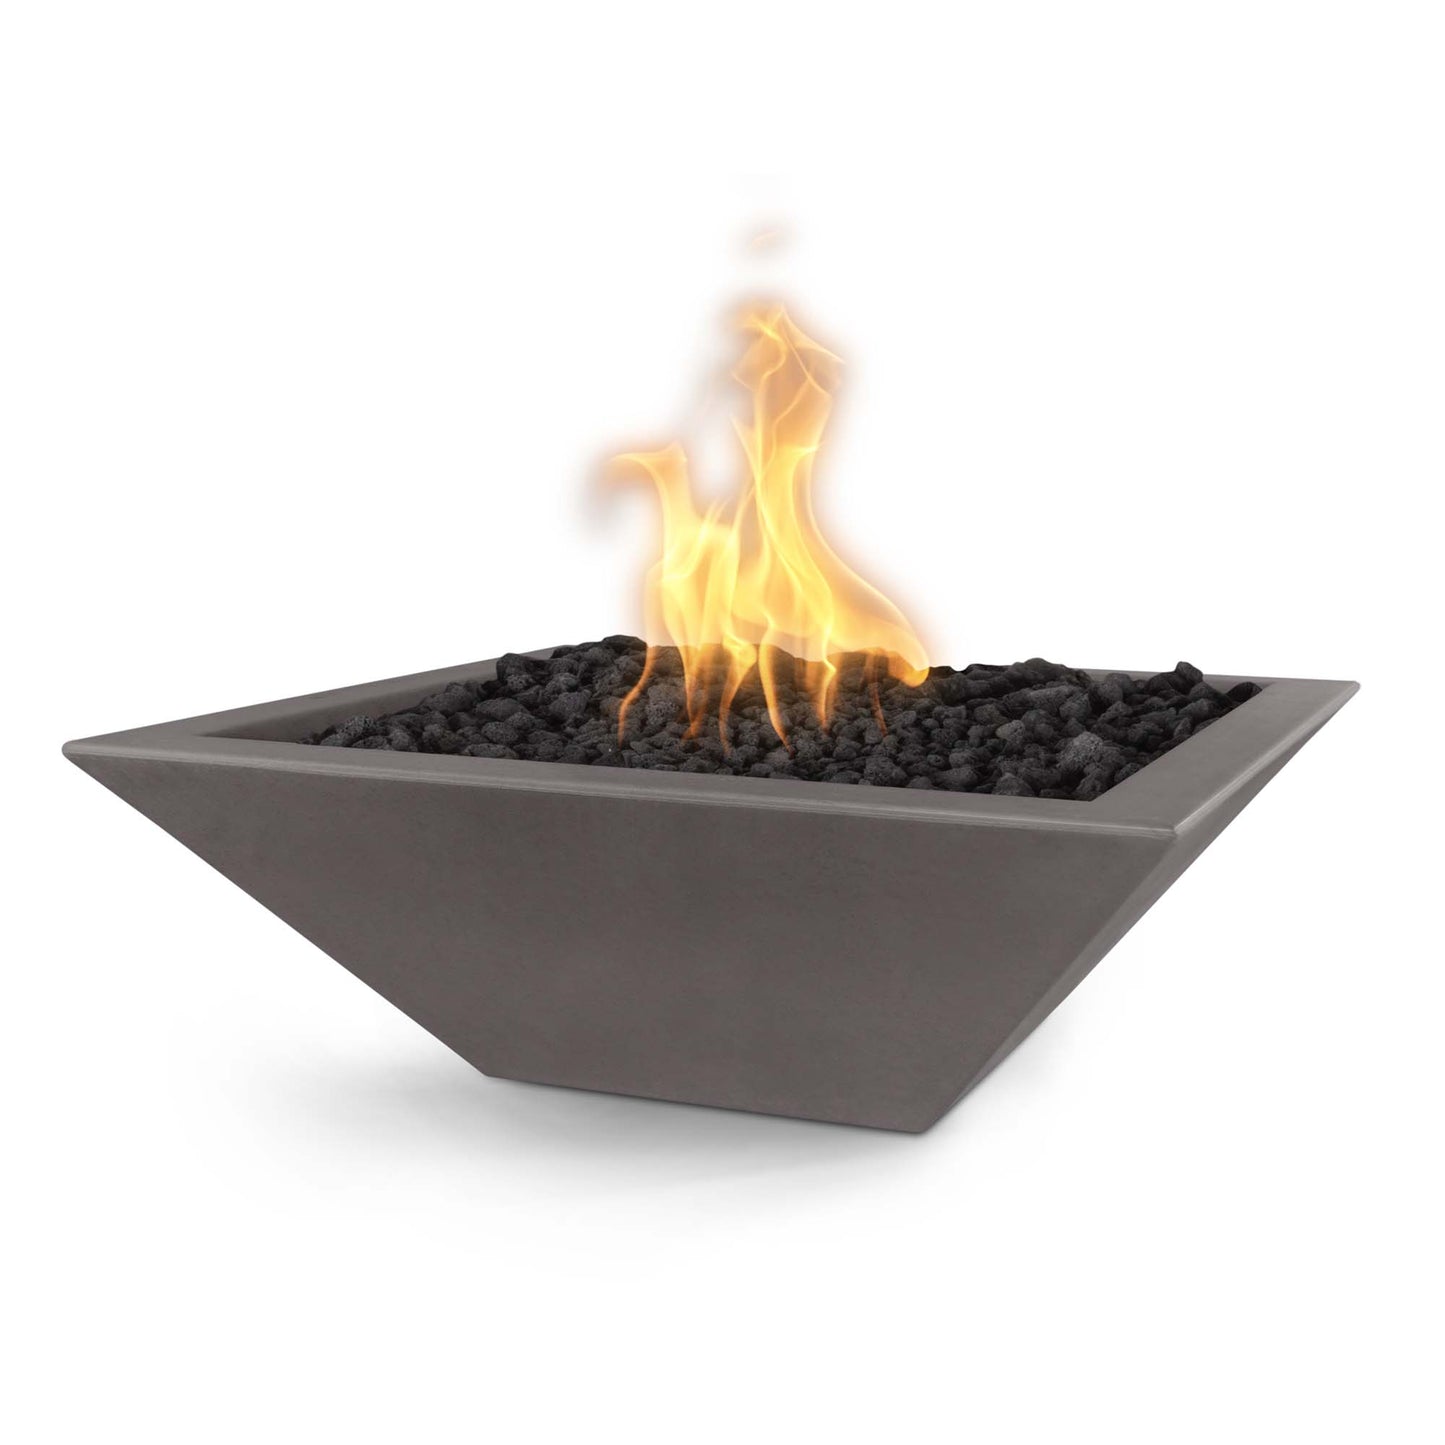 The Outdoor Plus Square Maya 30" Rustic White GFRC Concrete Liquid Propane Fire Bowl with Match Lit with Flame Sense Ignition